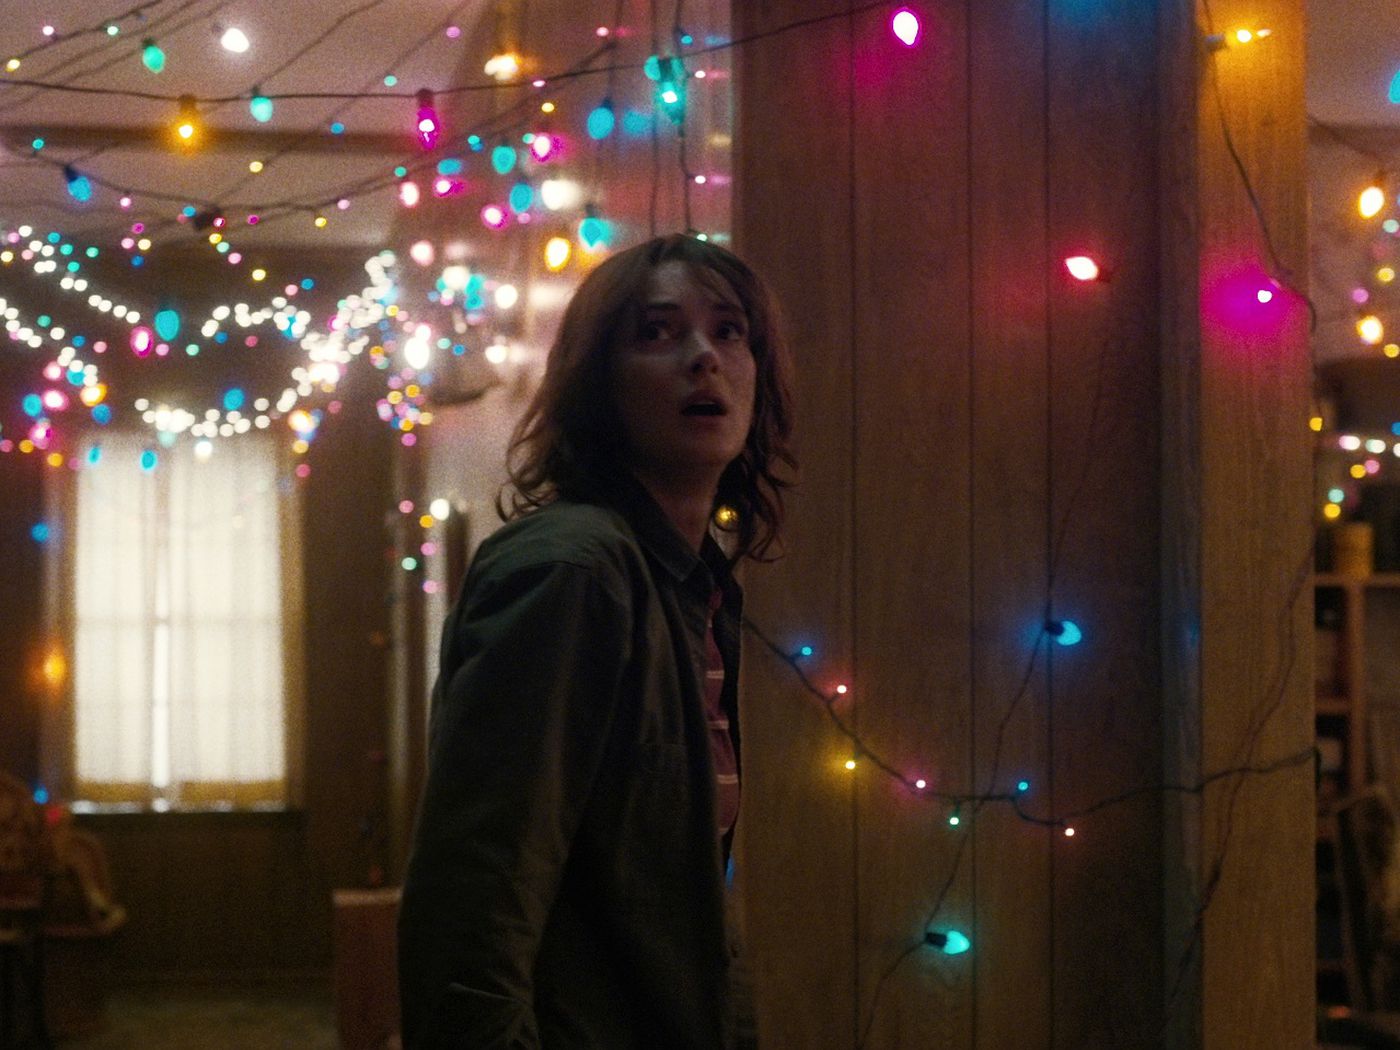 stranger things netflixs scary new drama is only made stronger its many flaws vox